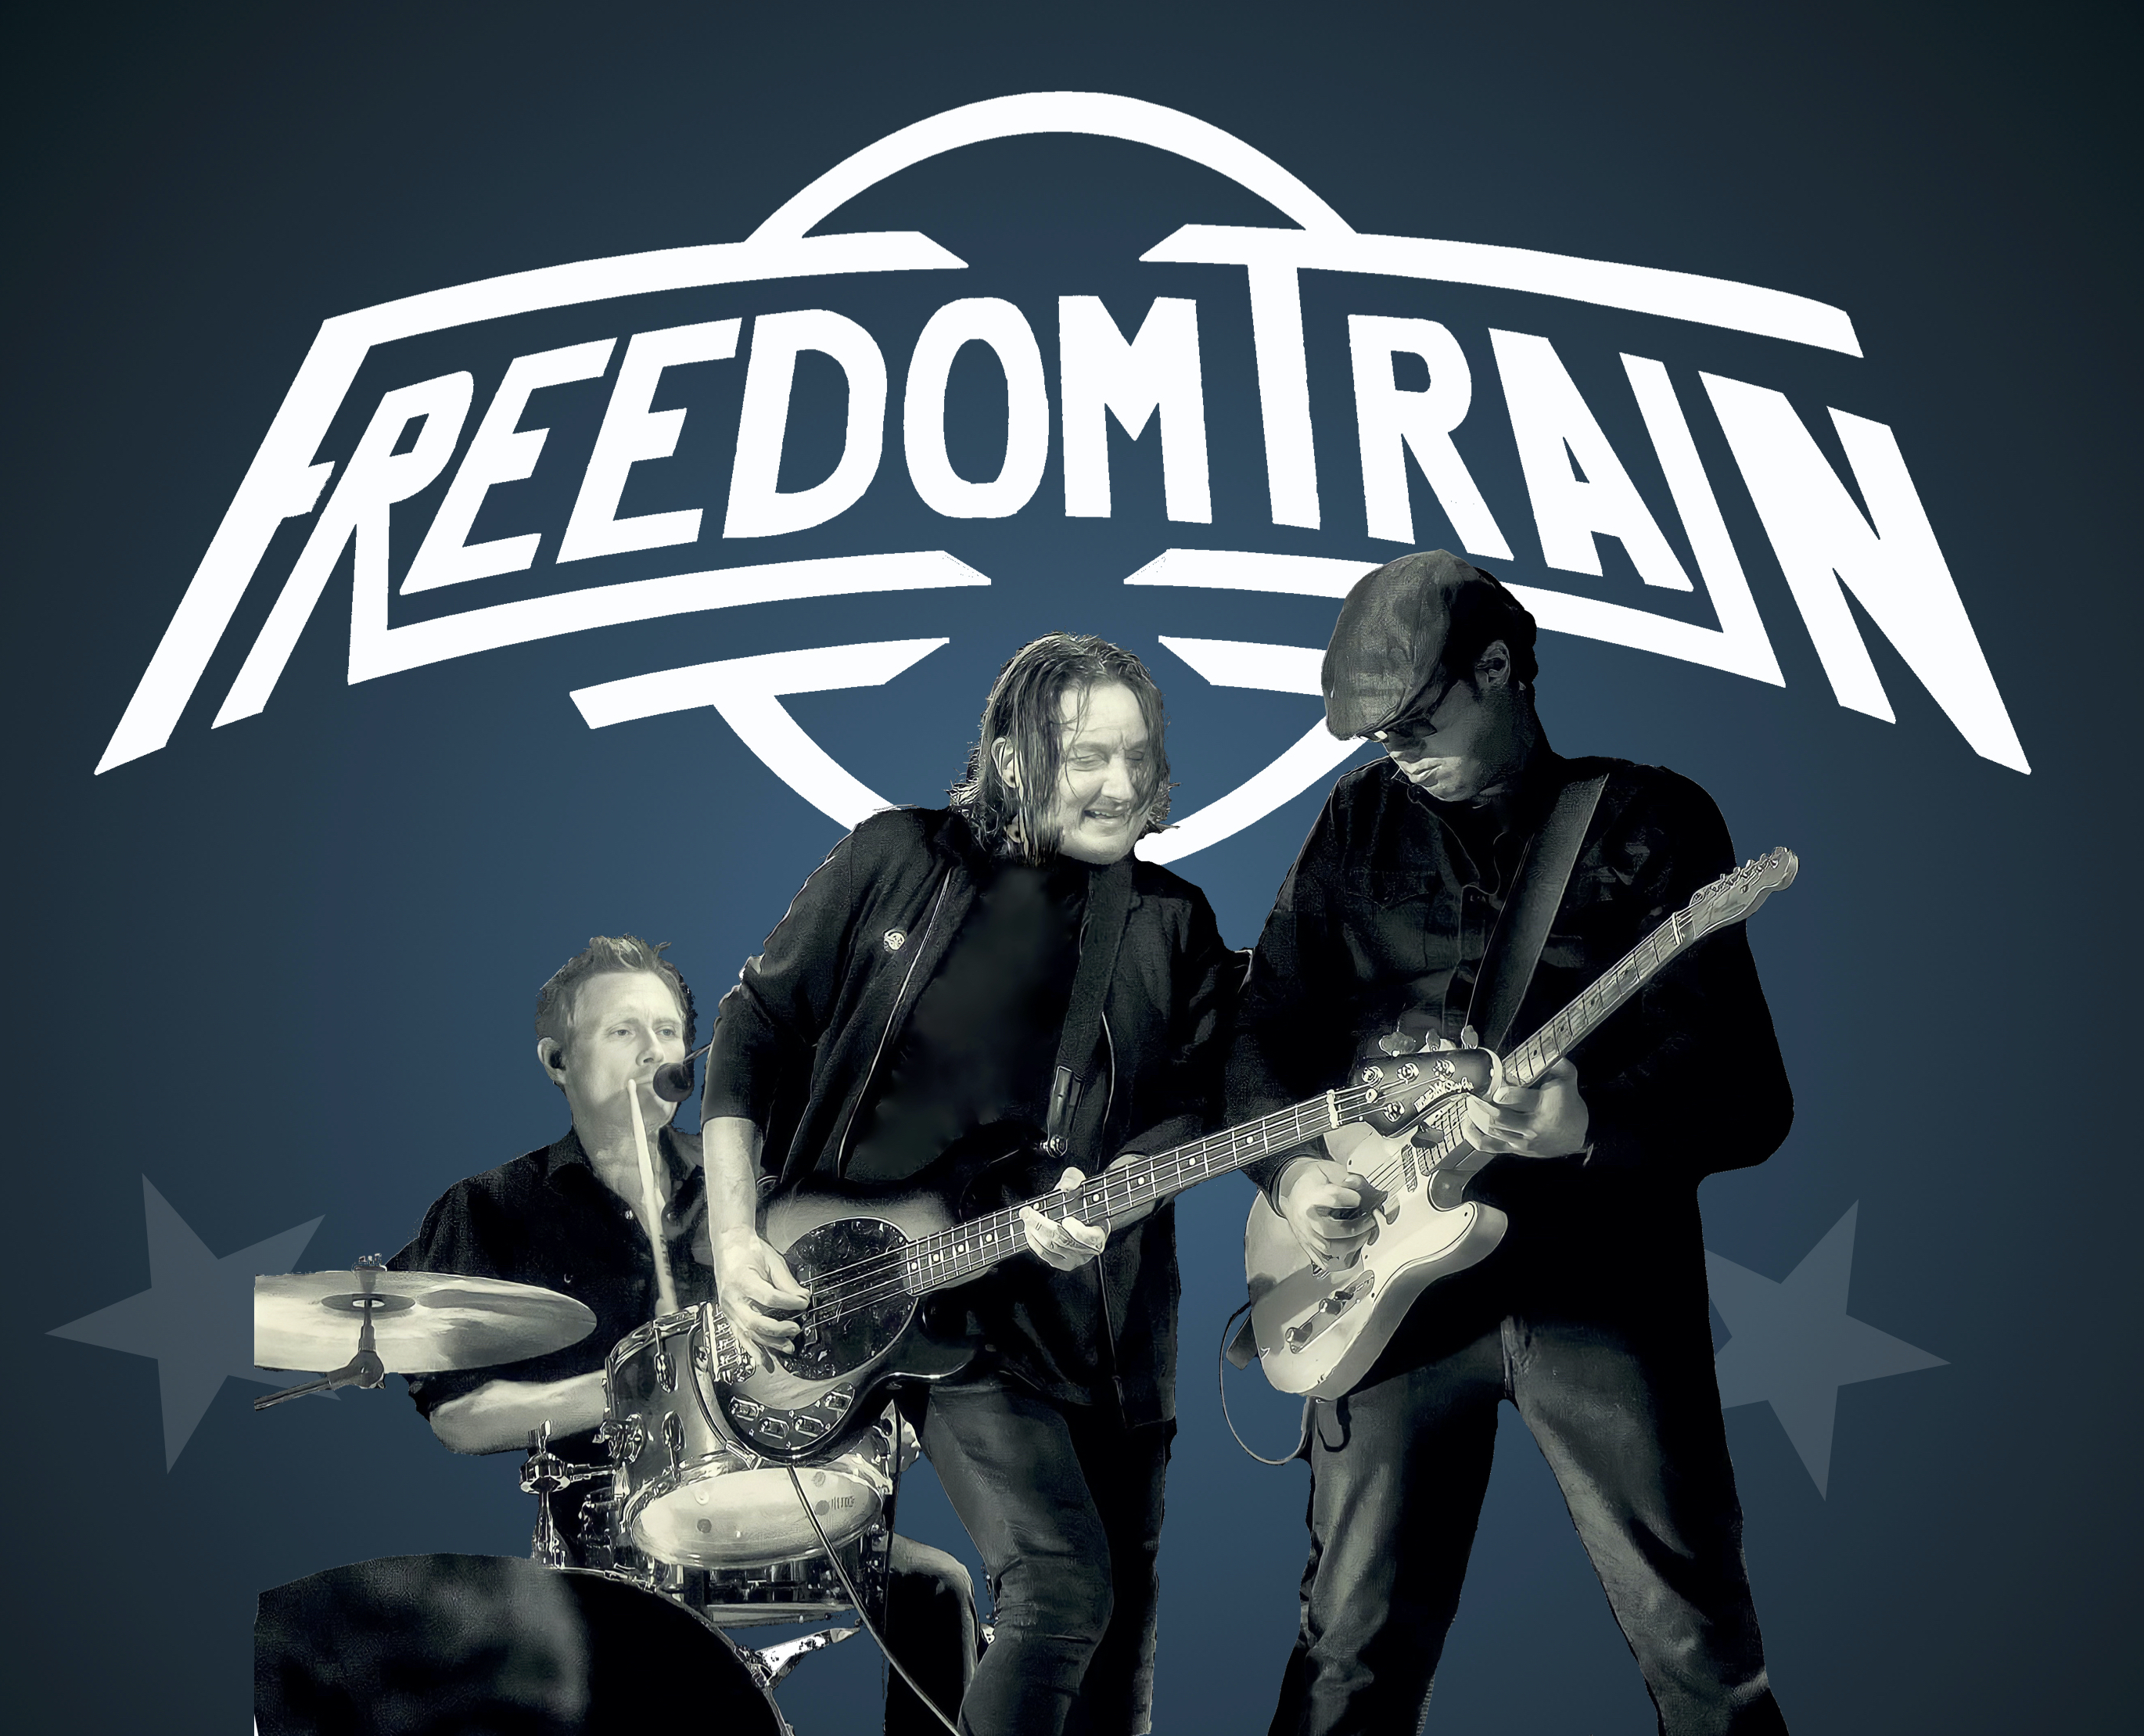 Freedom Train on stage